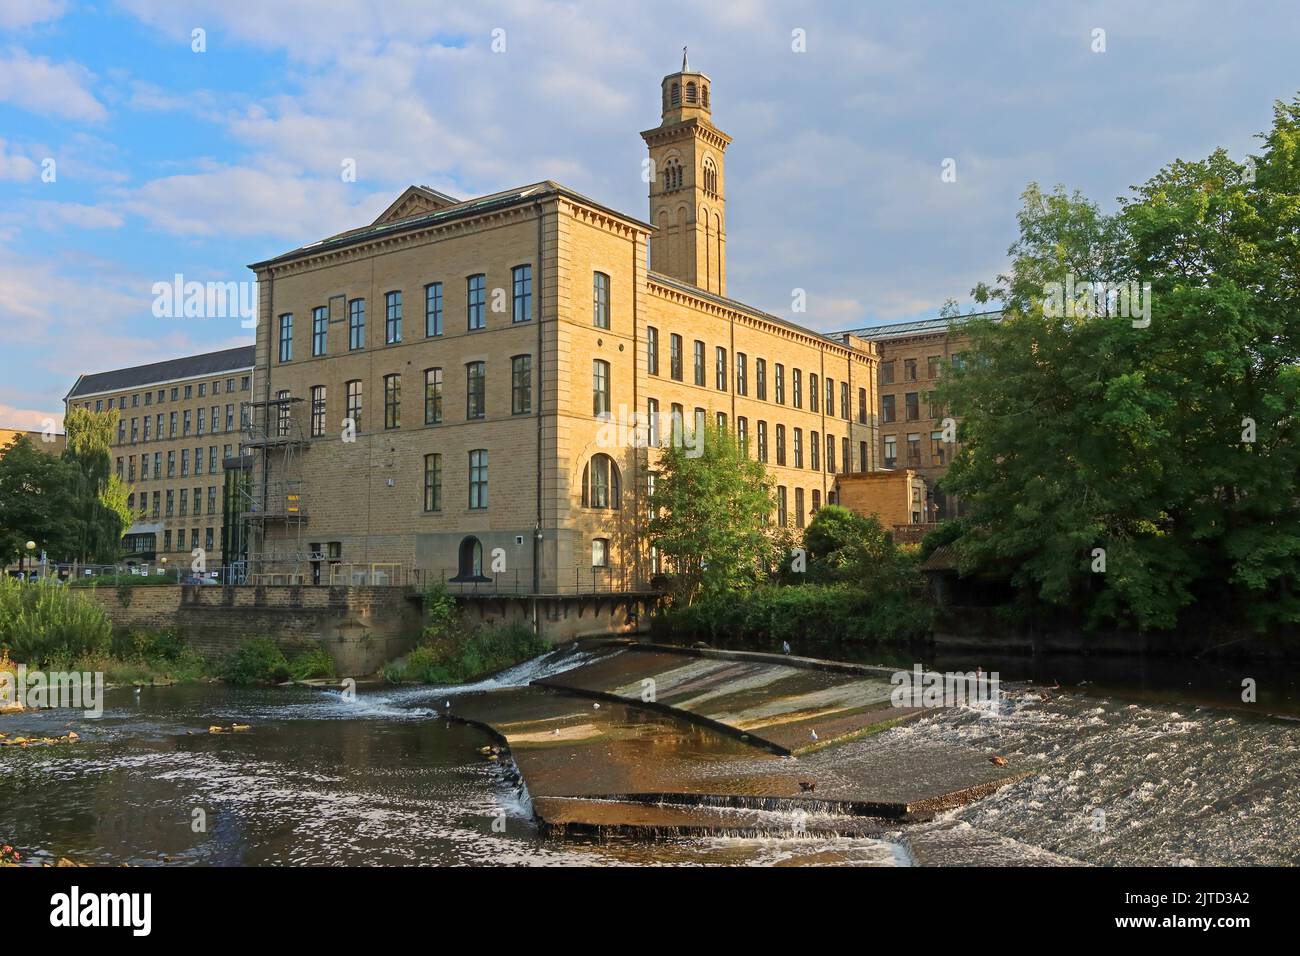 Listed buildings, mills & river Aire in Saltaire world heritage village site, Shipley, Bradford, West Yorkshire, England, UK, BD18 3LA Stock Photo